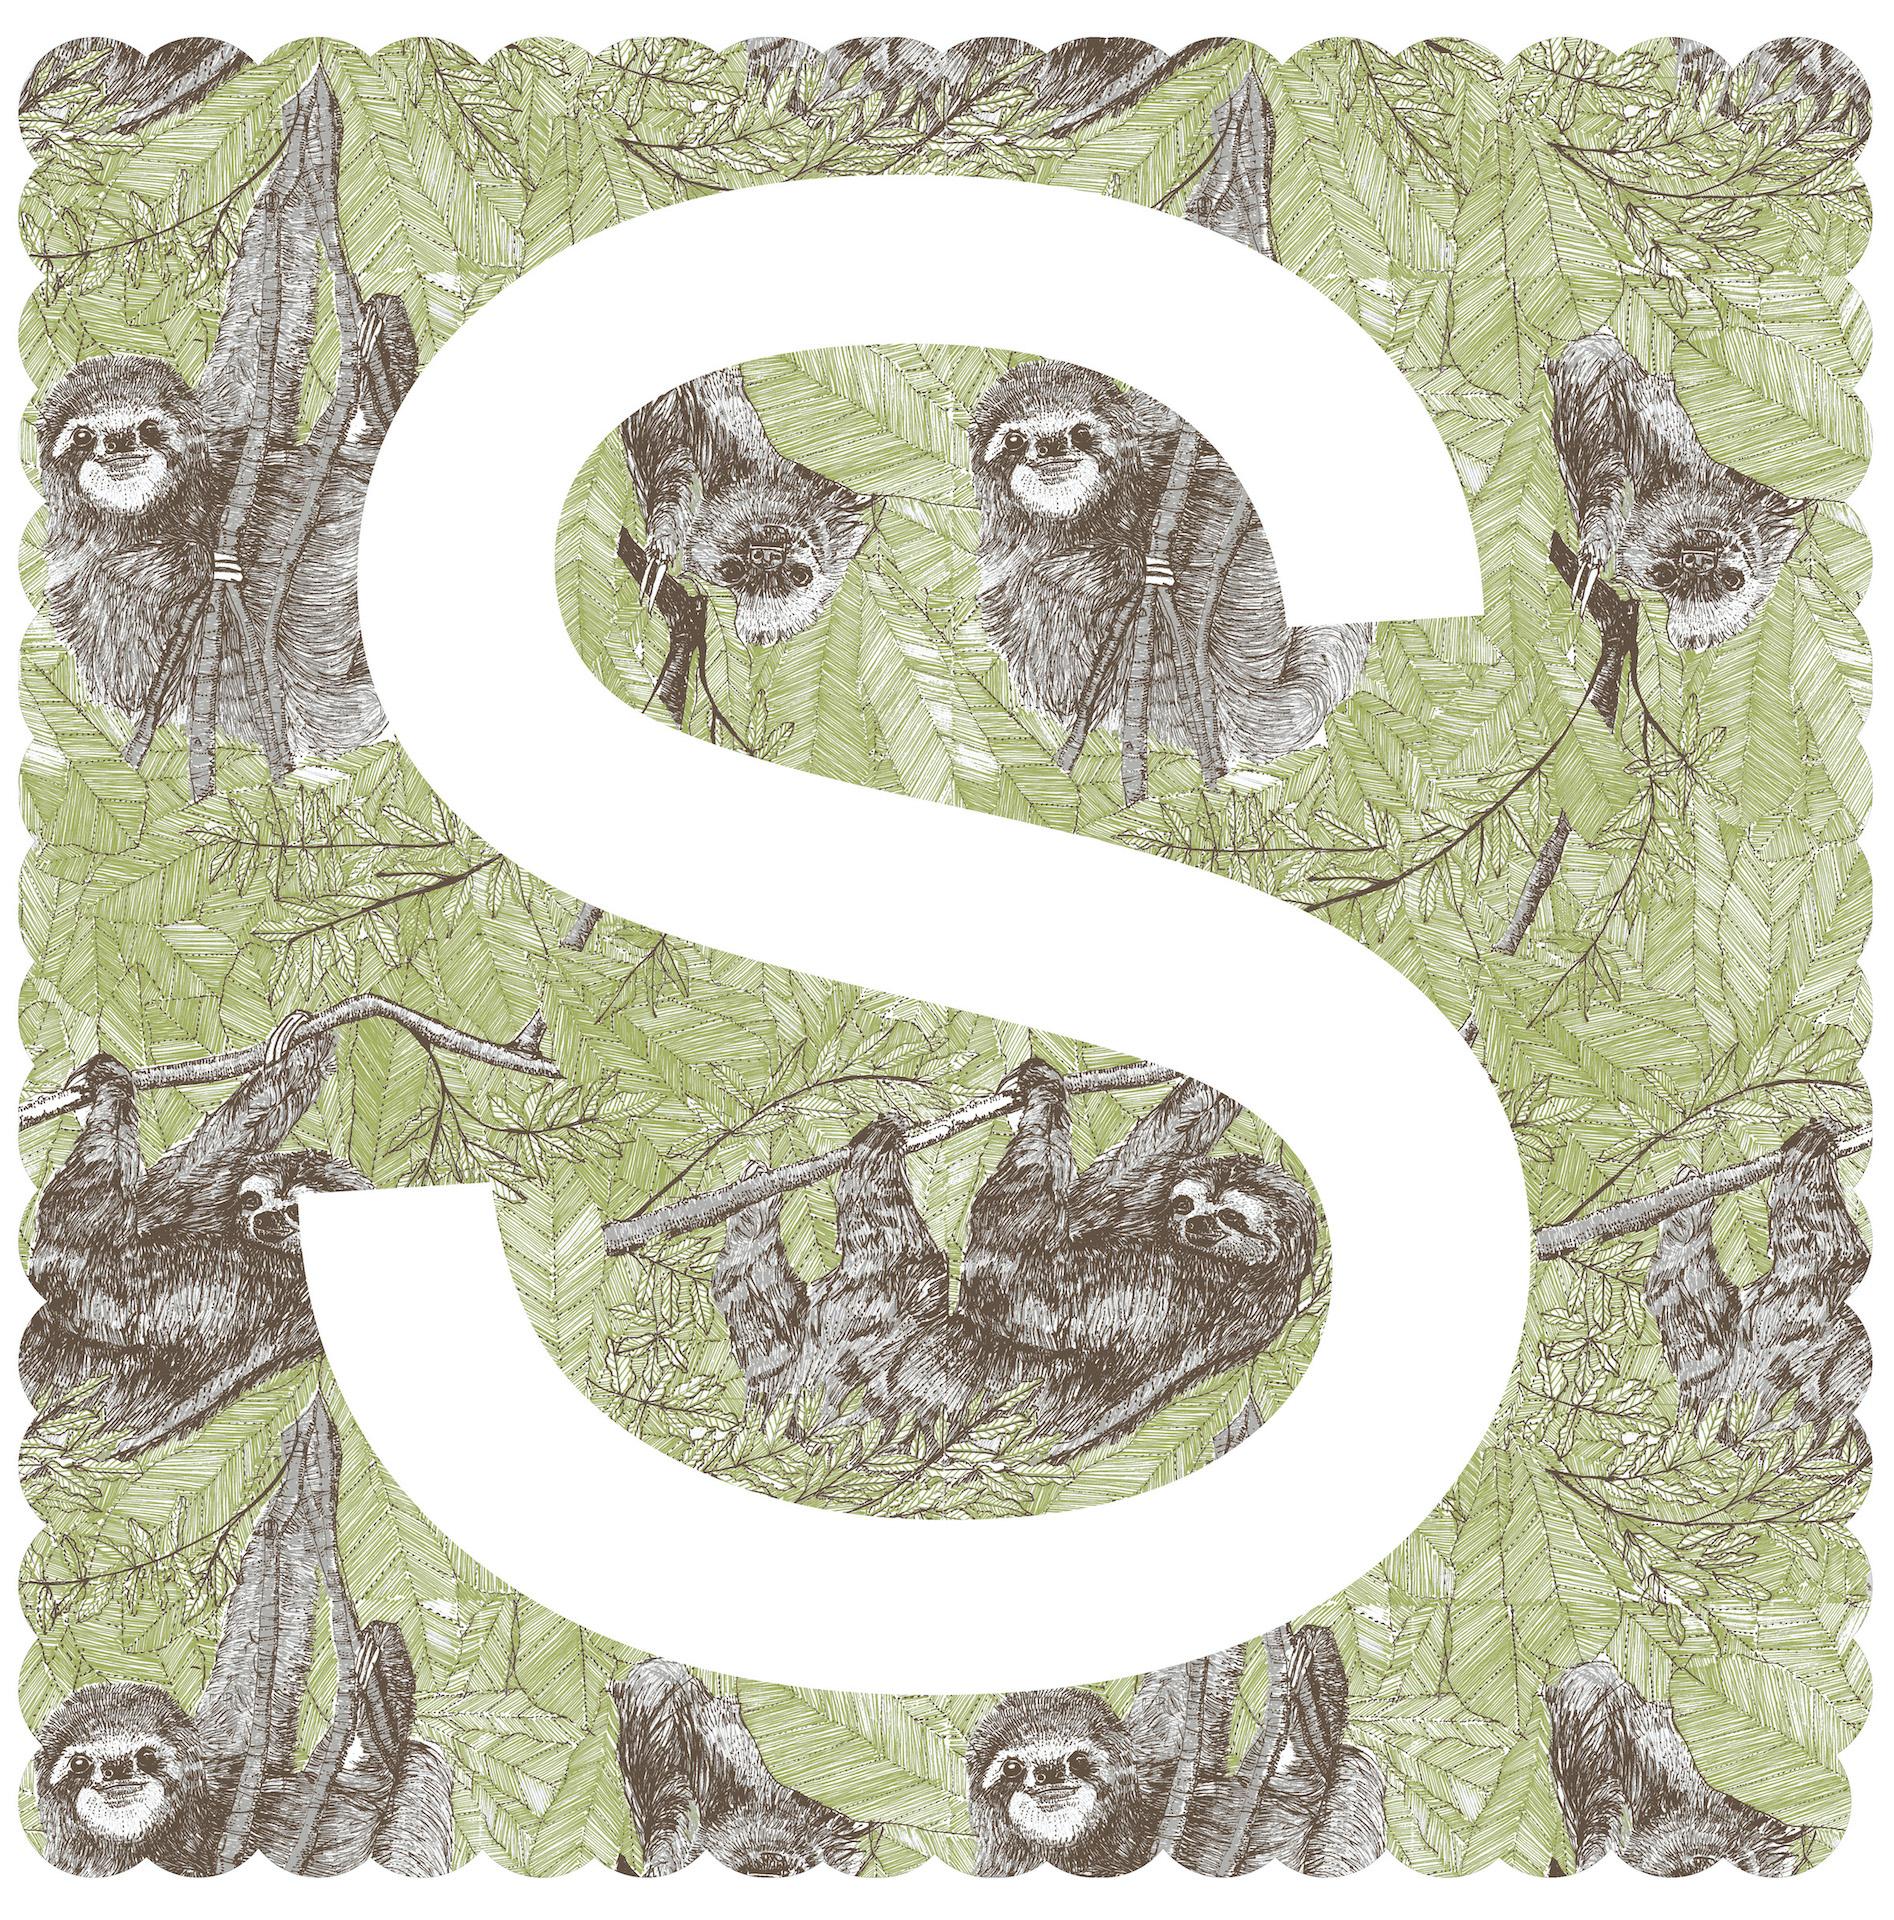 Clare Halifax, S is for Sloth, Affordable Art, Animal Art, Chidren's Art